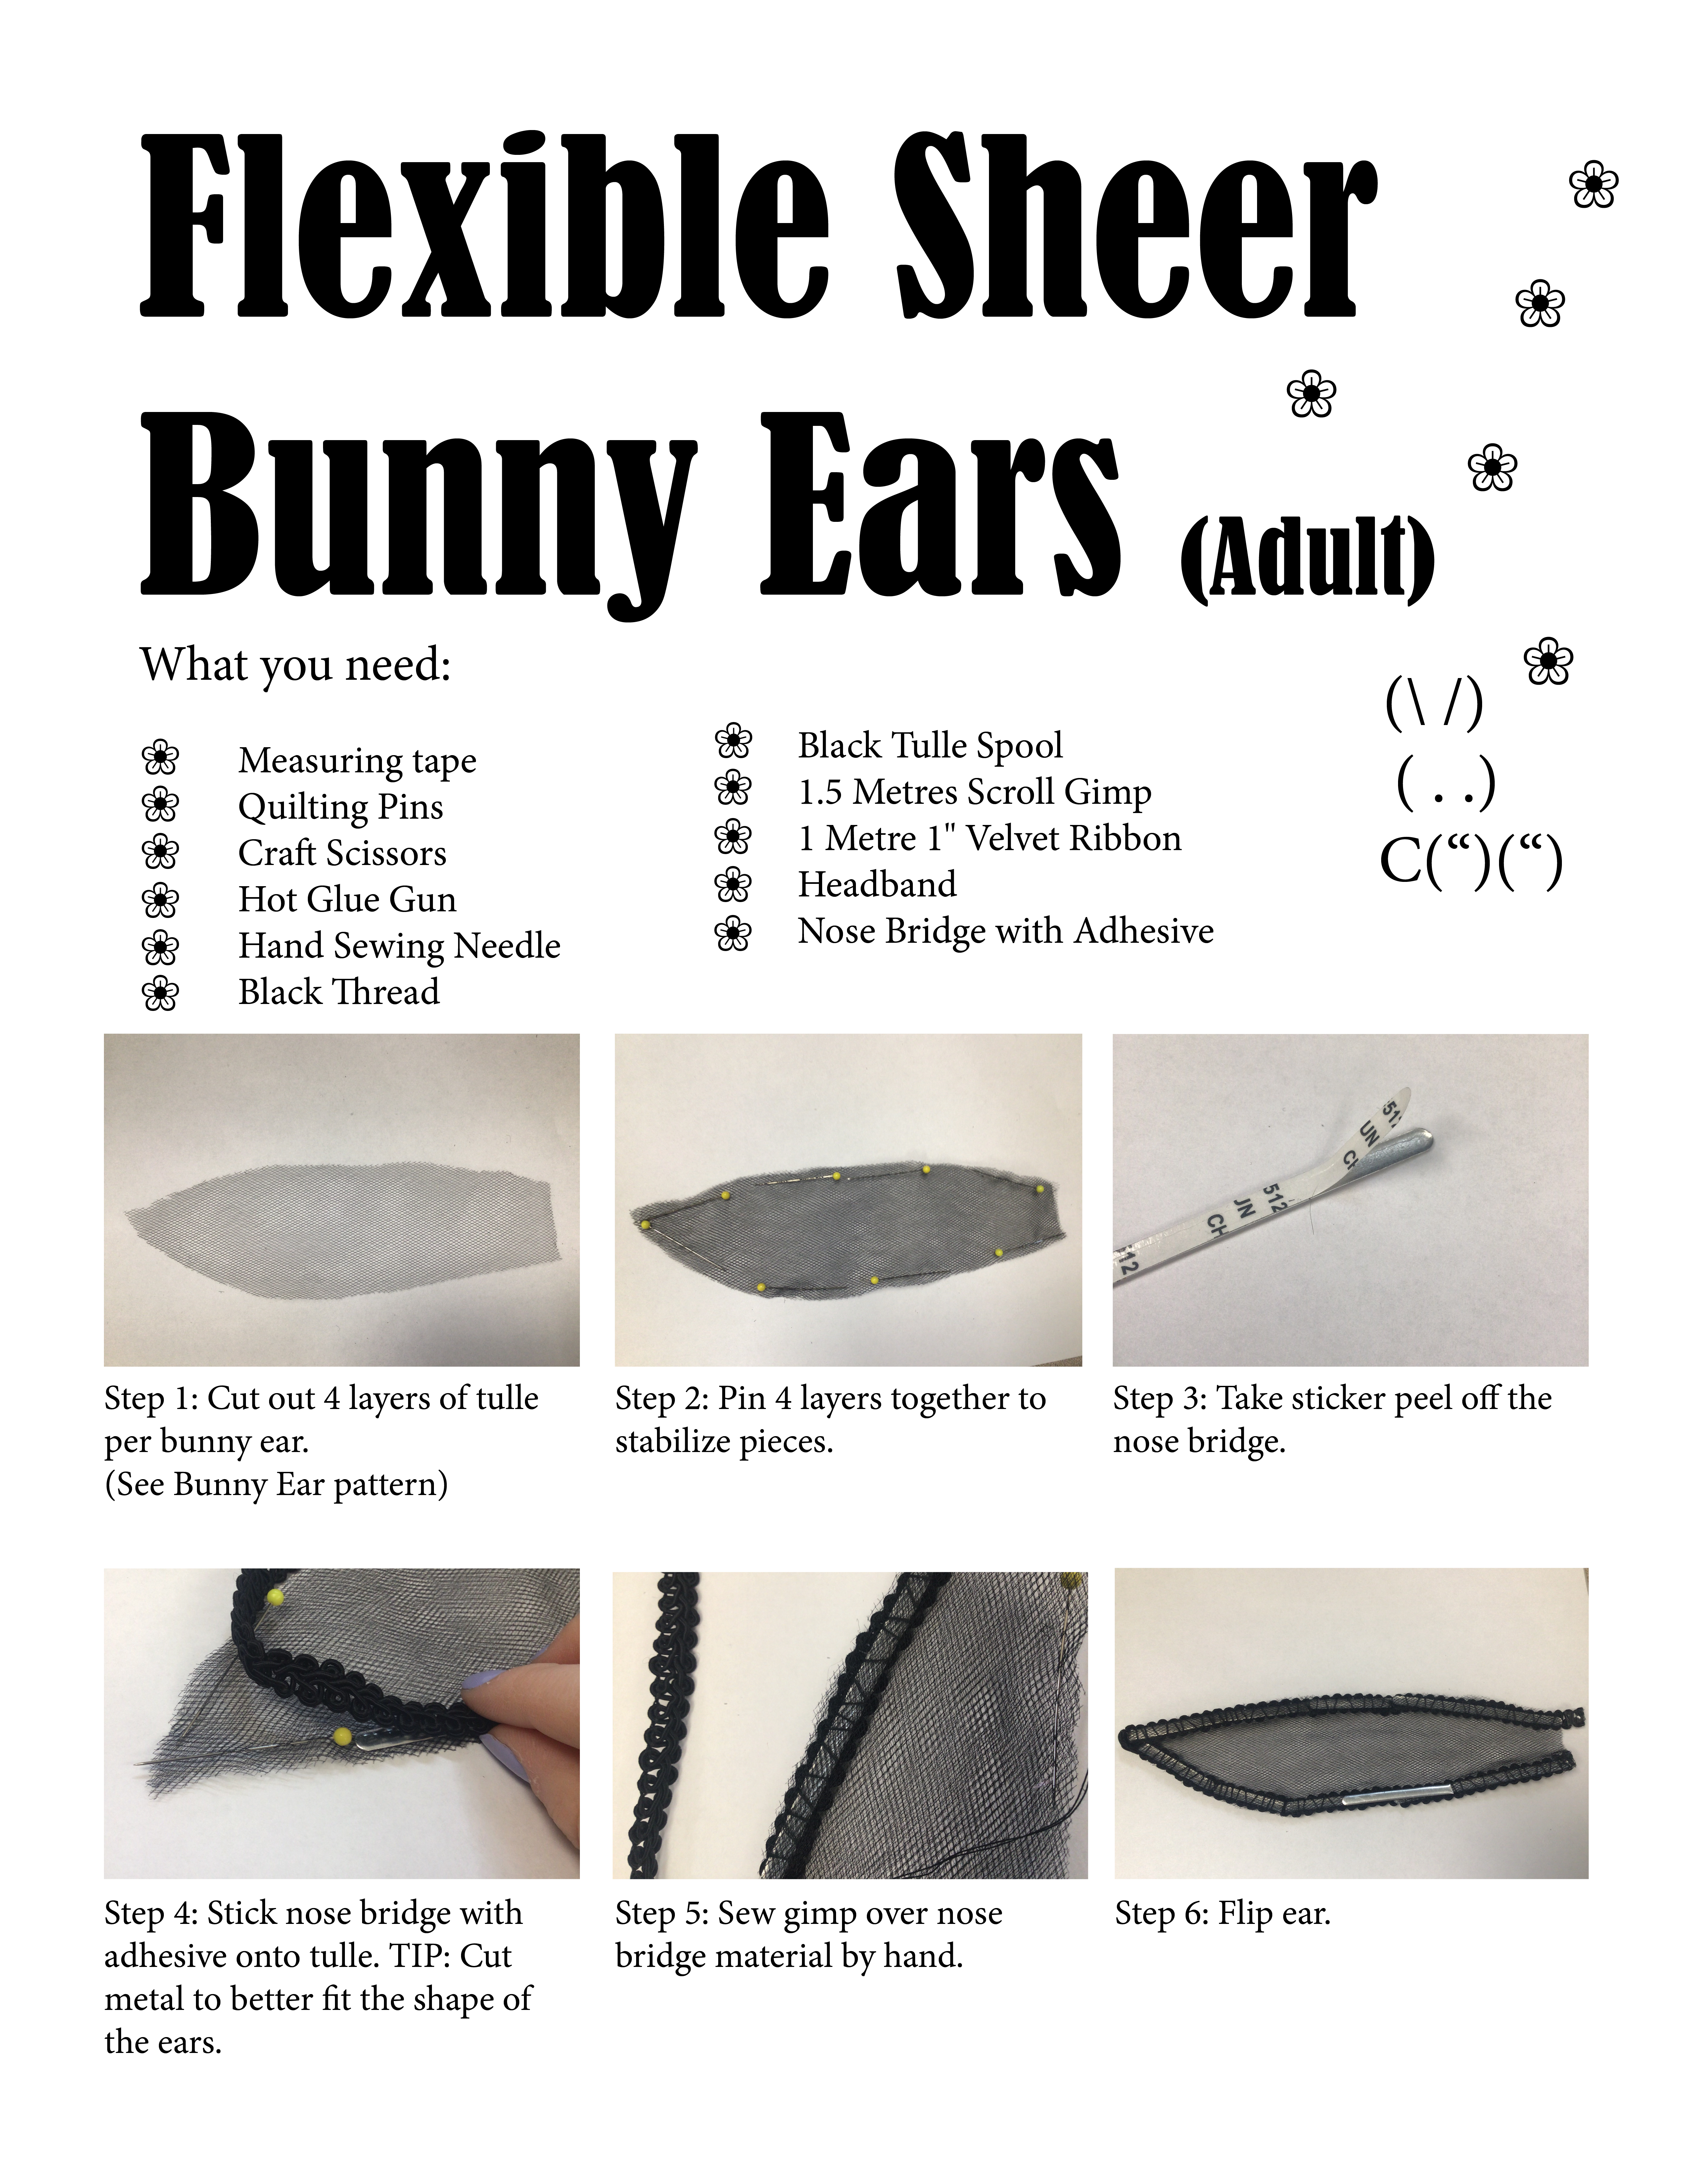 First set of steps to creating your own flexible bunny ears for adults